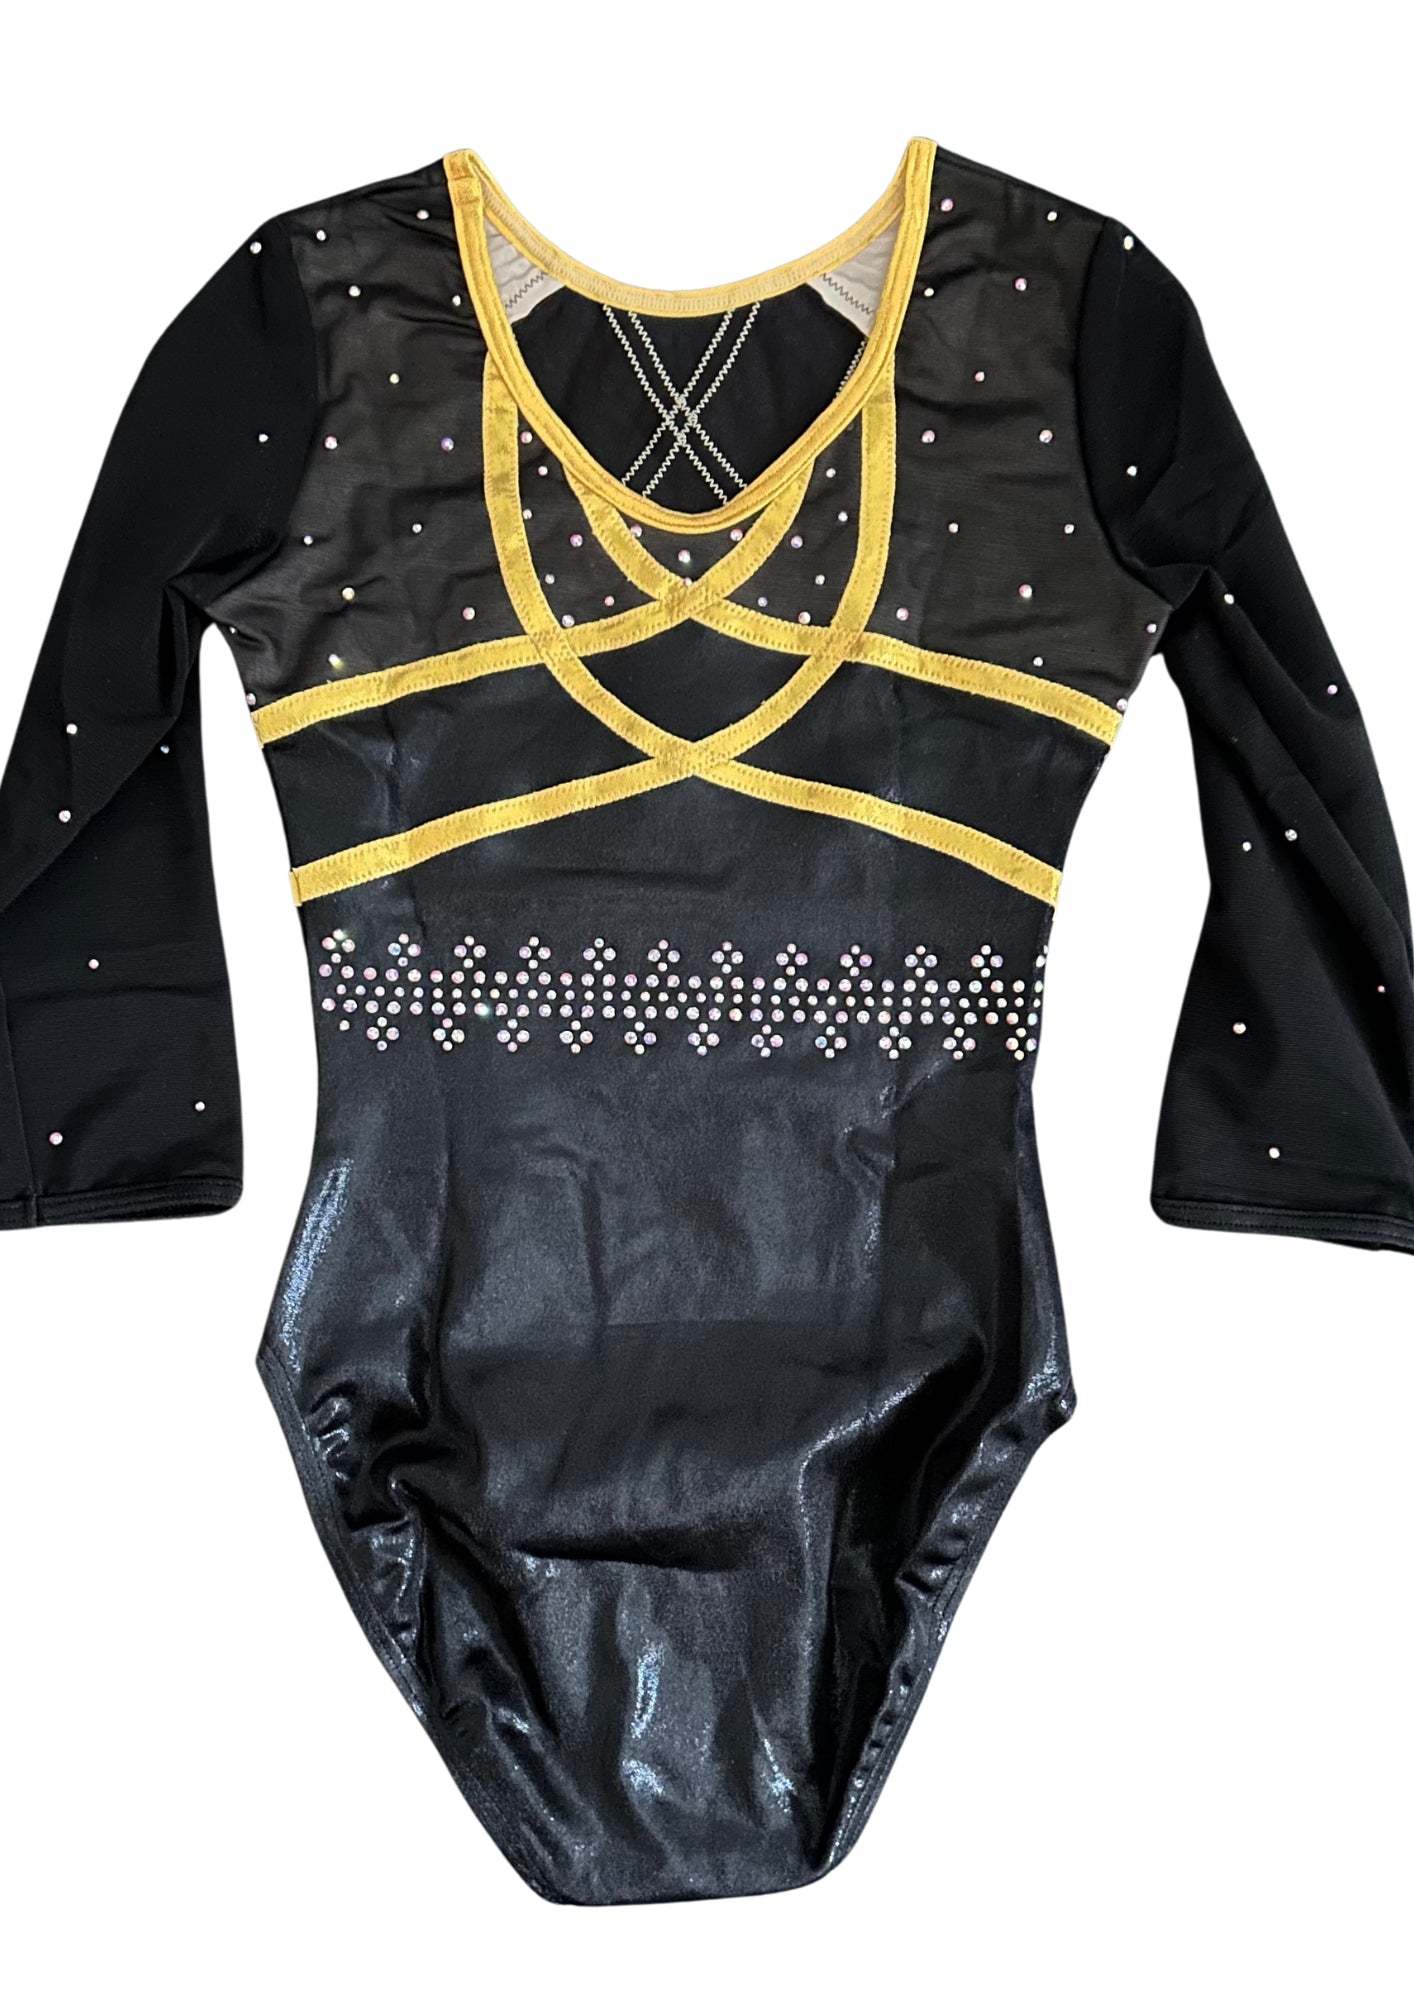 Gymnastics Leotard for competitions, gymnast, tumbling, teamgym, cheap, comfortable.